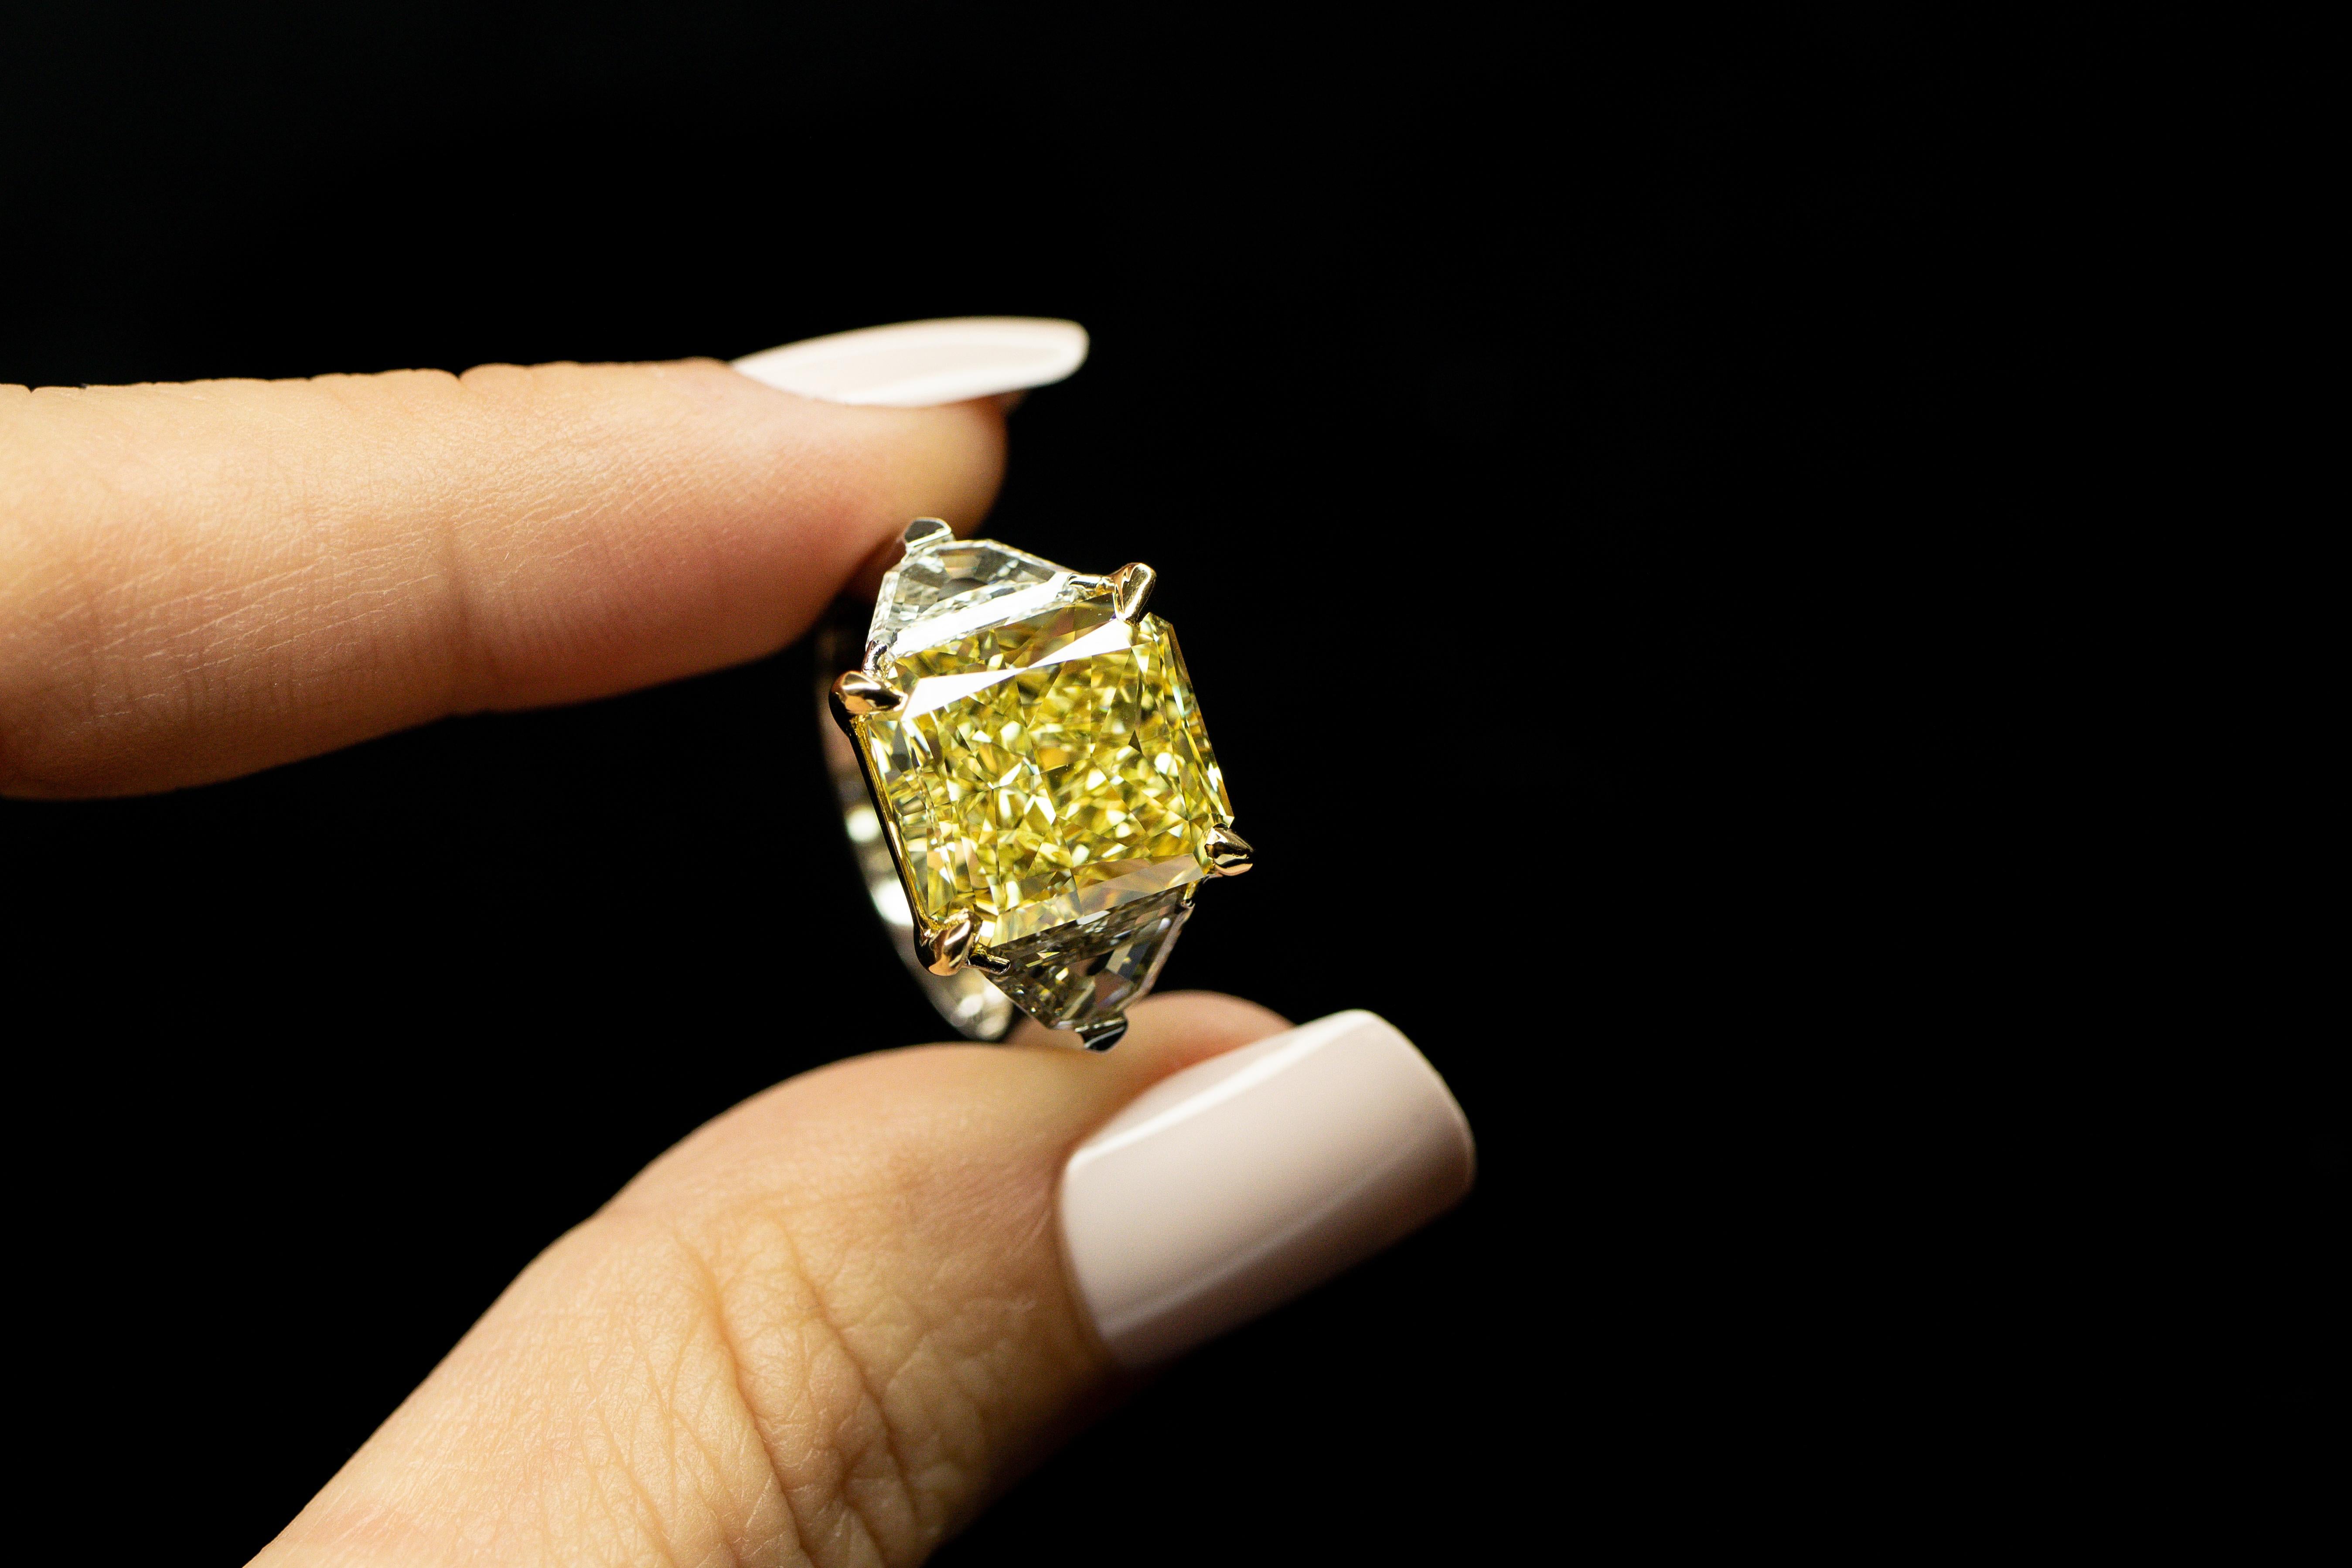 As yellow as the sun, a beautiful 8.11ct Radiant, Fancy Yellow, VVS2 Natural Diamond set in platinum & 18K yellow gold with 2 stunning Trapezoid cut natural diamonds=1.23cttw

This Diamond is GIA certified.